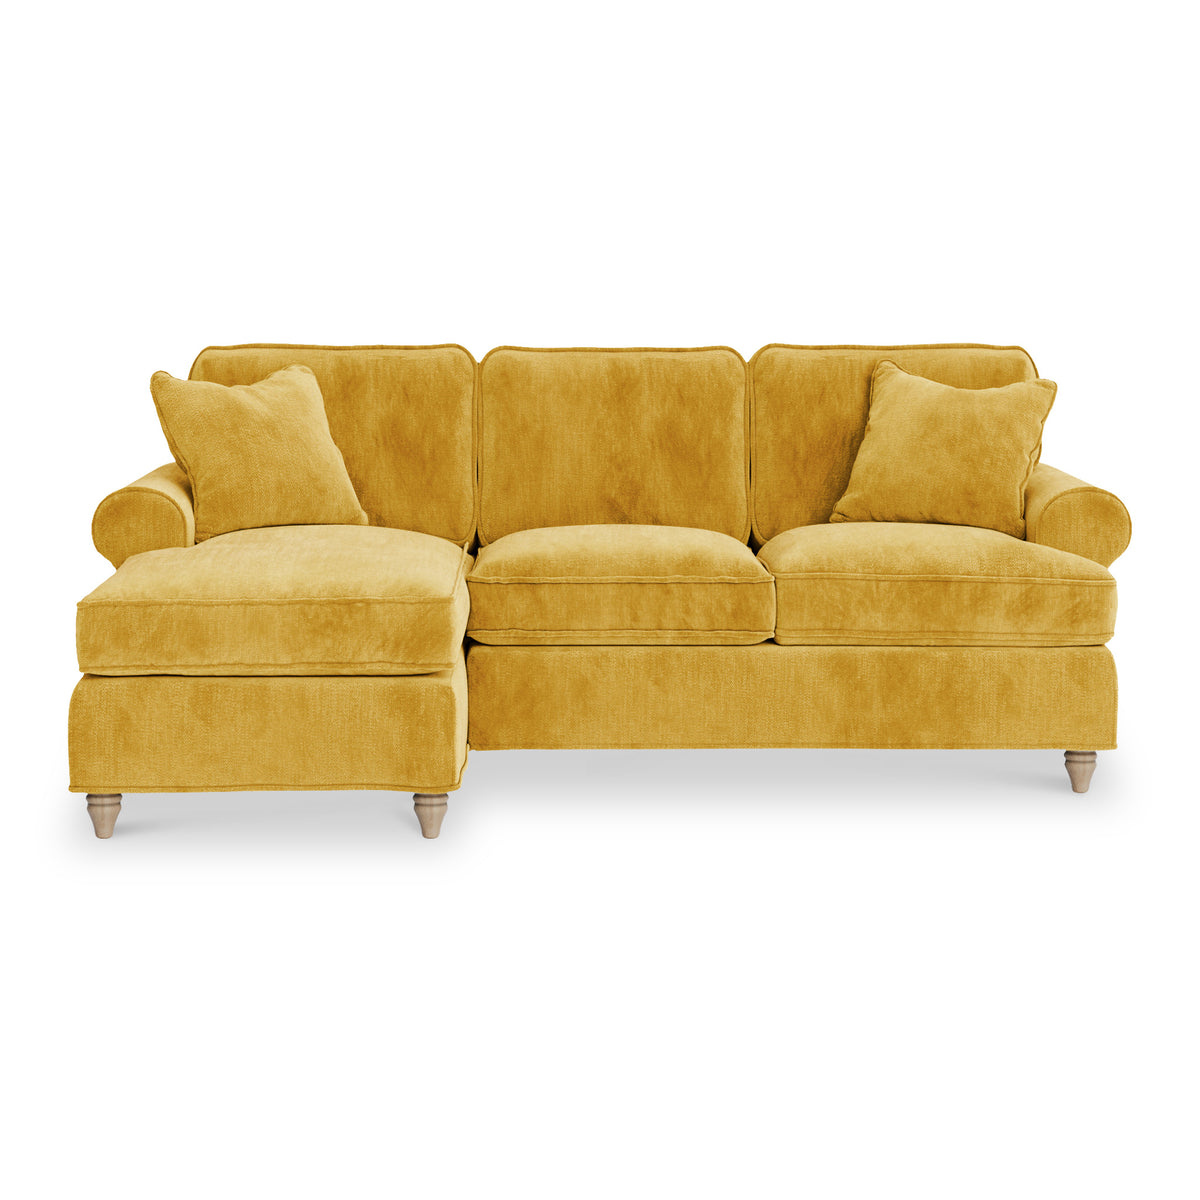 Alfie Chaise Sofa in Gold by Roseland Furniture